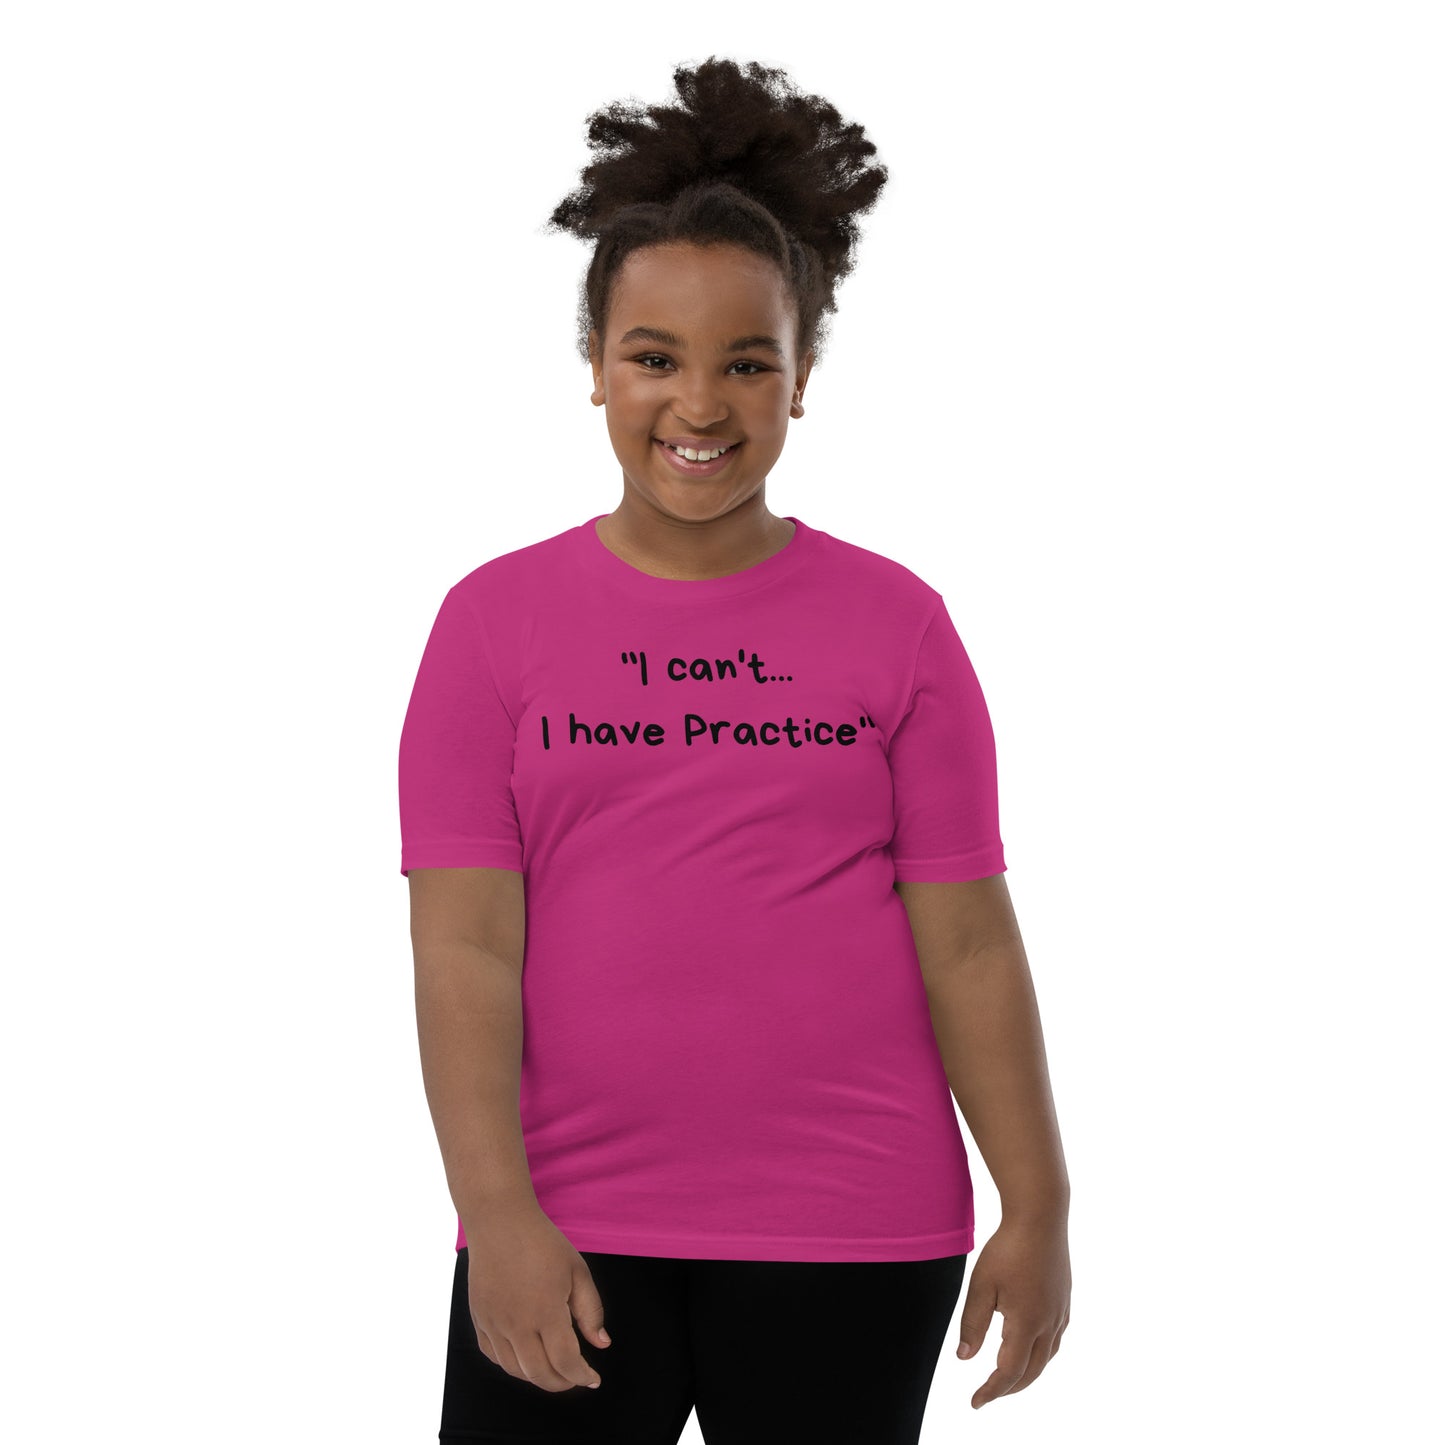 I Have Practice - Youth Short Sleeve T-Shirt